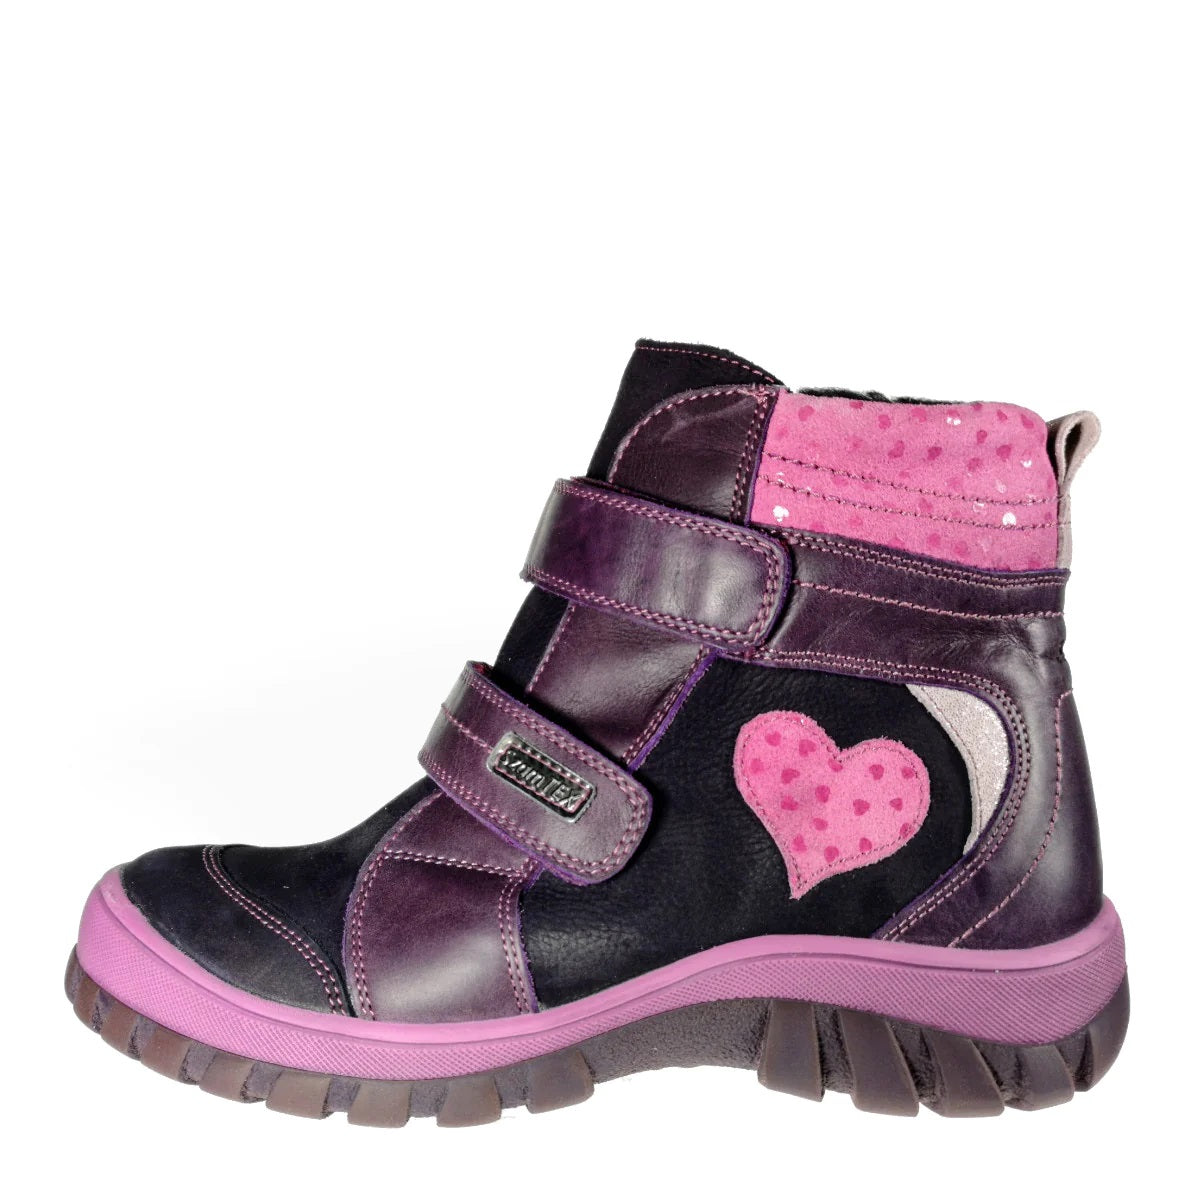 Premium quality insulated boots made from 100% genuine leather lining and upper, mauve with pink/purple heart decor. This Szamos Kids product meets the highest expectations of healthy and comfortable kids shoes. The exceptional comfort these shoes provide assure the well-being and happiness of your child.